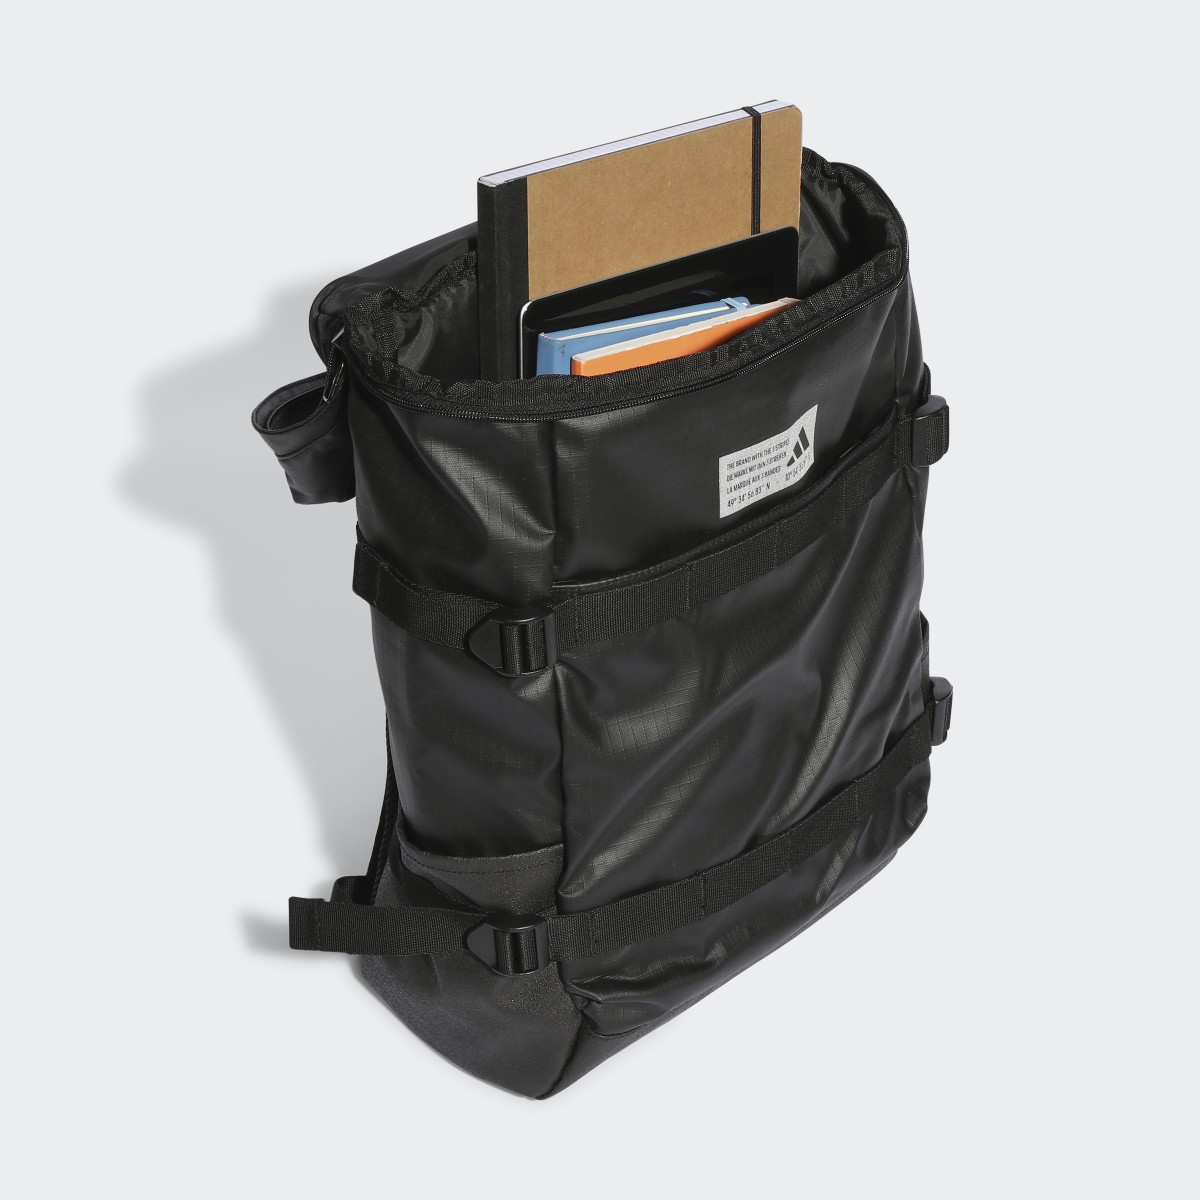 Adidas 4ATHLTS ID Gear Up Backpack. 5